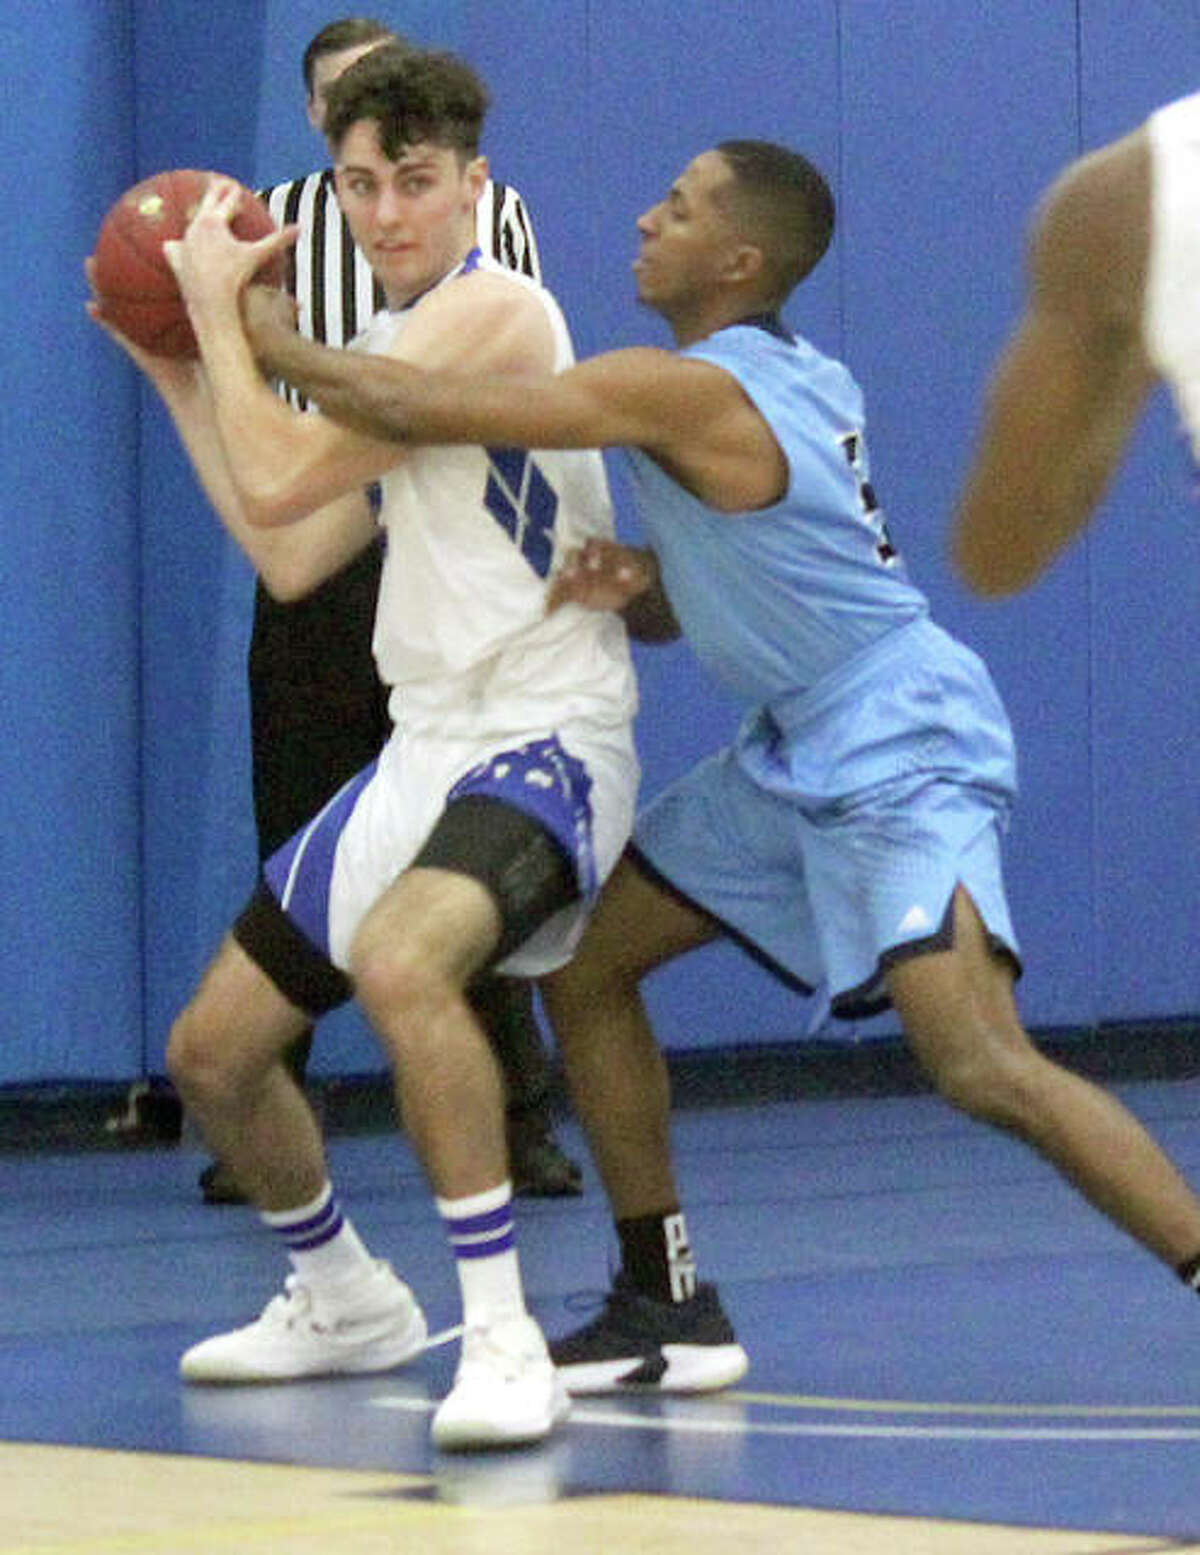 LCCC’s Ben Wright, left, is closely guarded by Darius Riley of St. Louis Community College during Saturday’s game at the River Bend Arena.